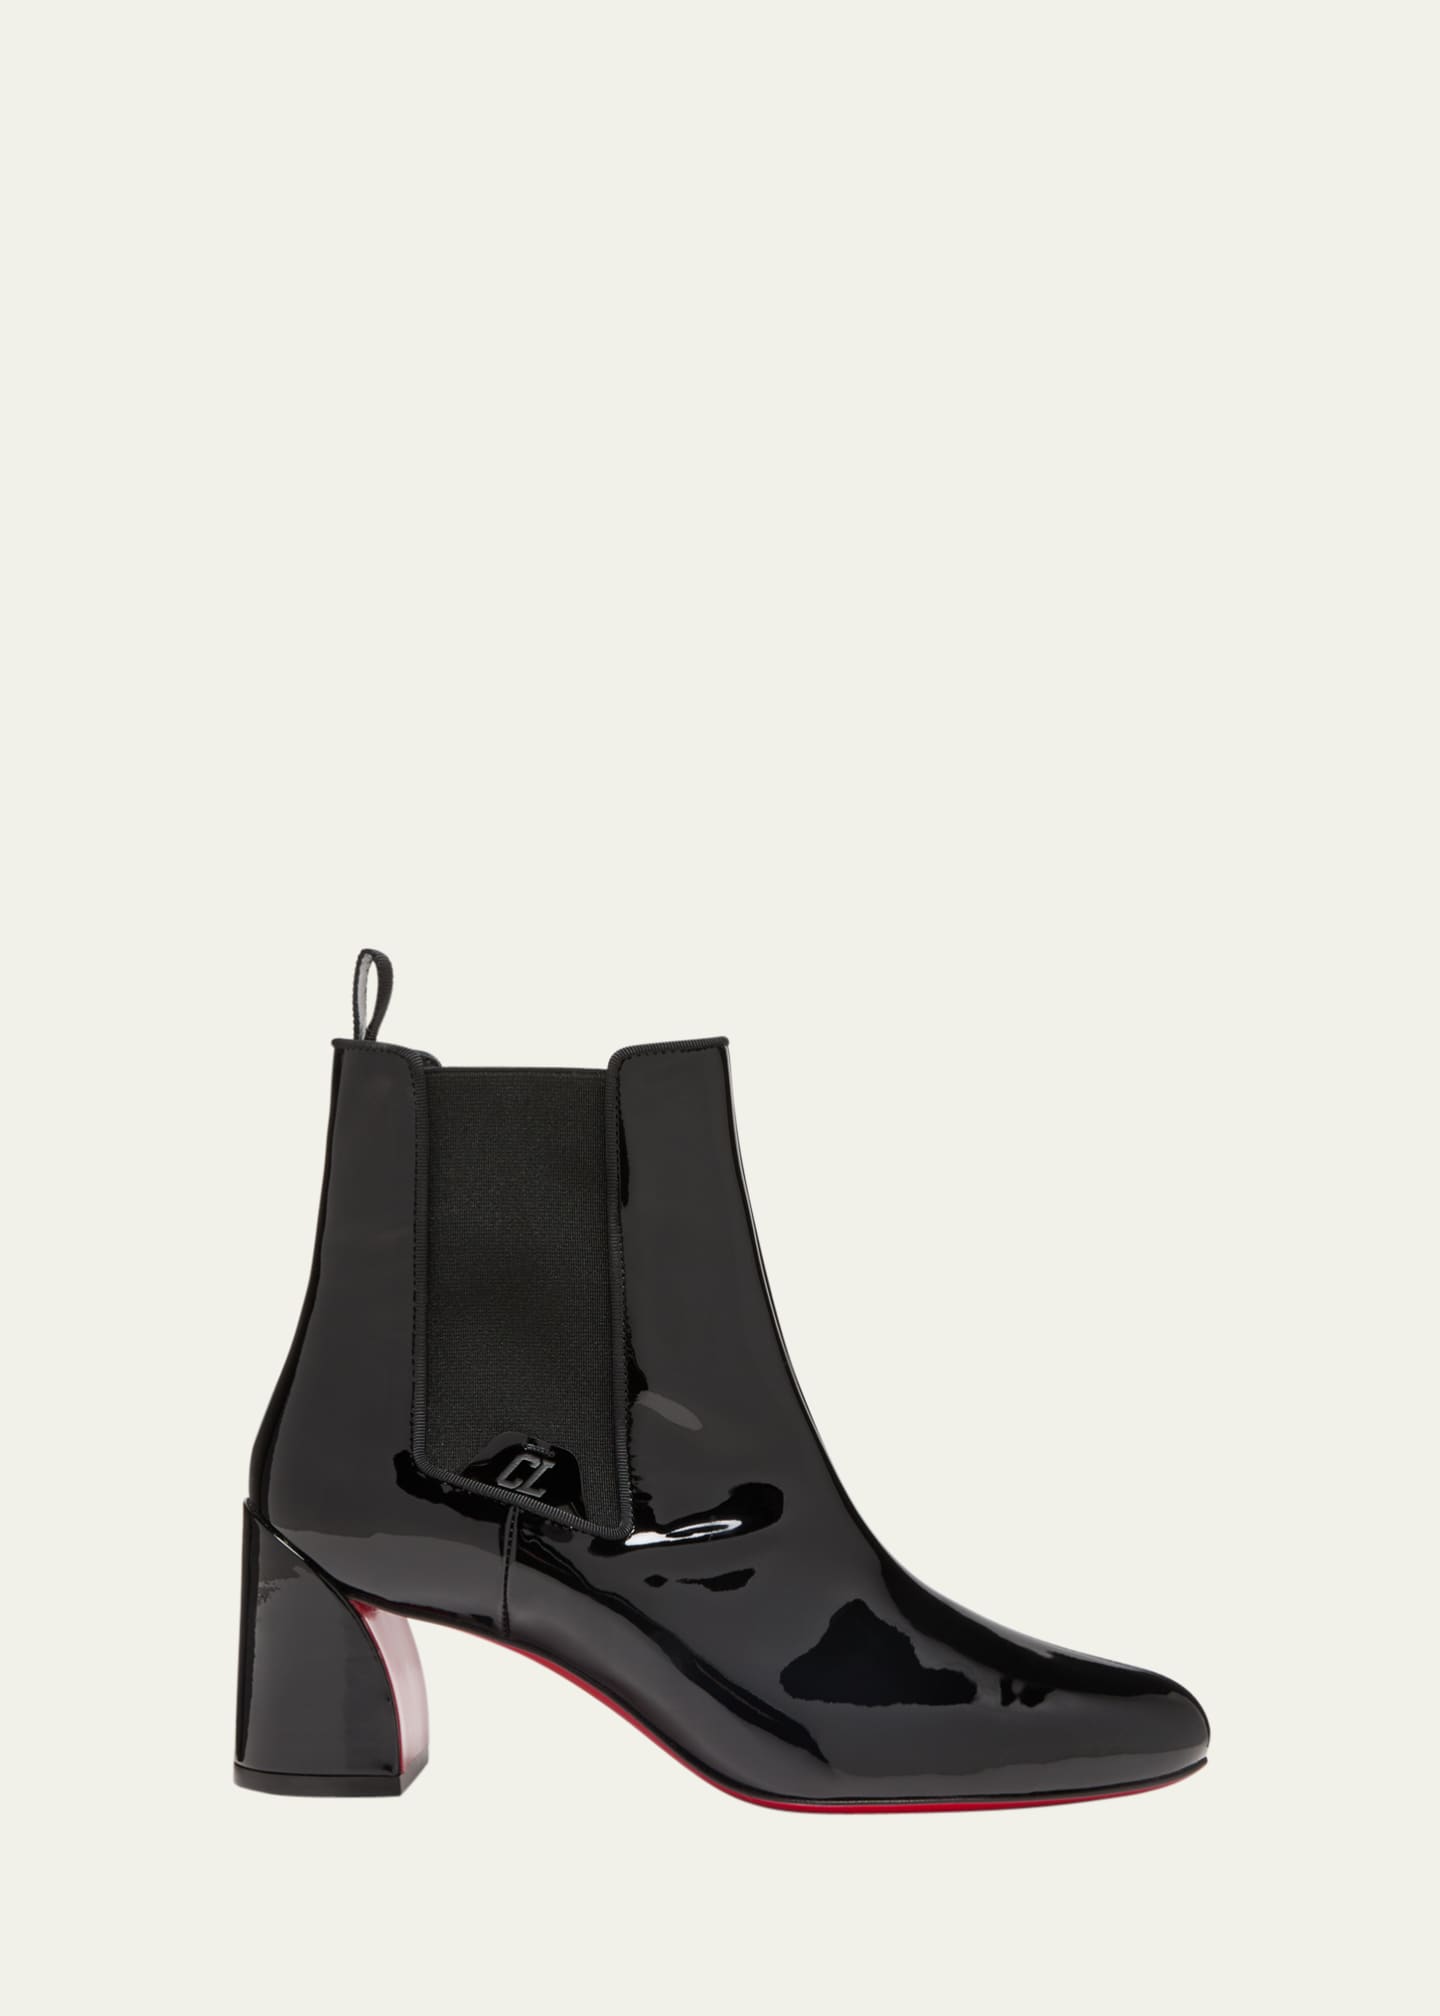 Christian Louboutin Patent Red Sole Chelsea Boots Bergdorf Goodman